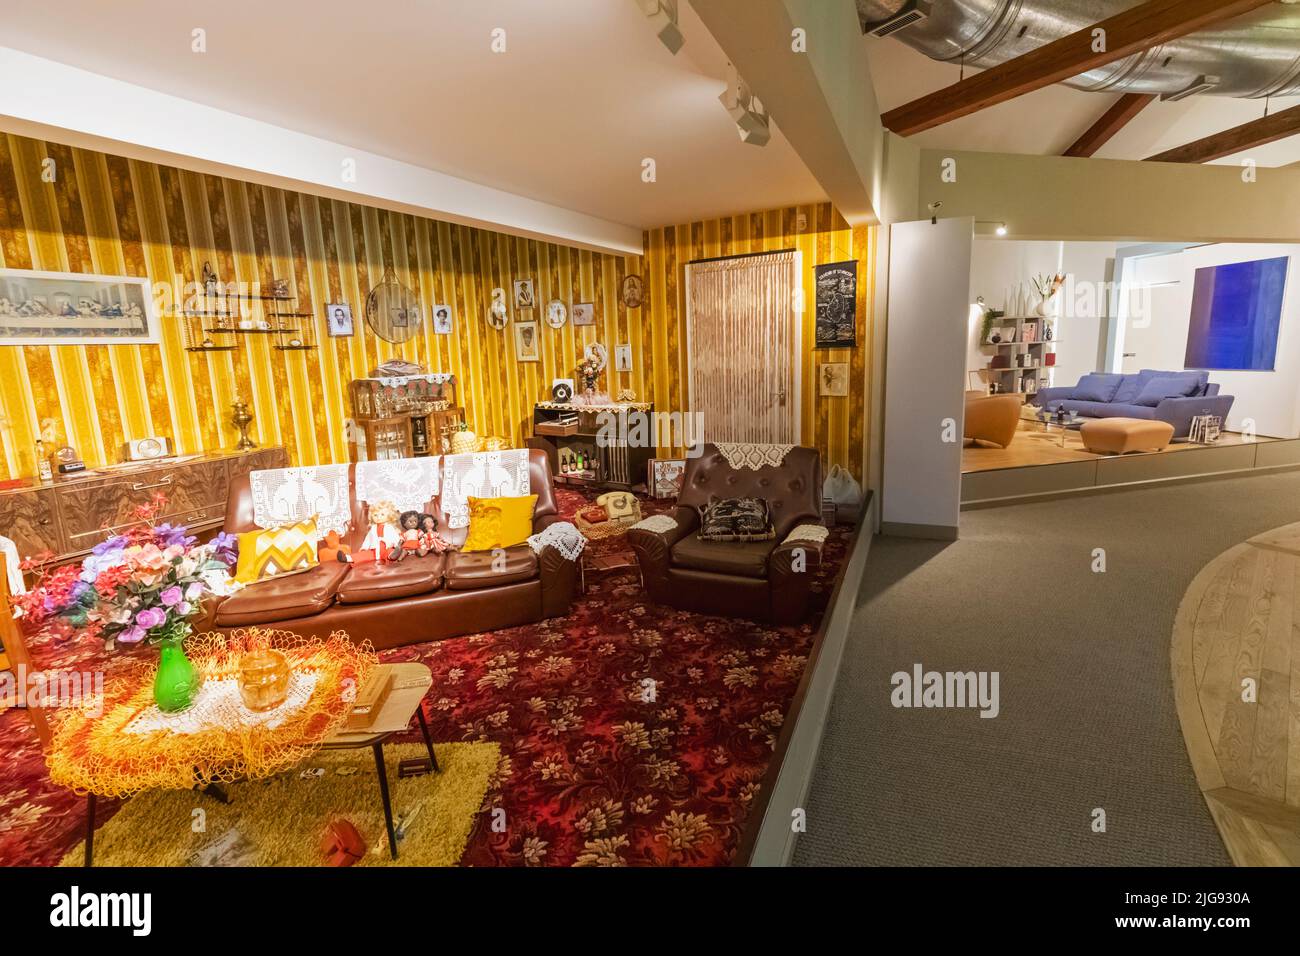 England, London, Shoredith, Museum of the Home, Interior View of Period Living Room Displays Stock Photo